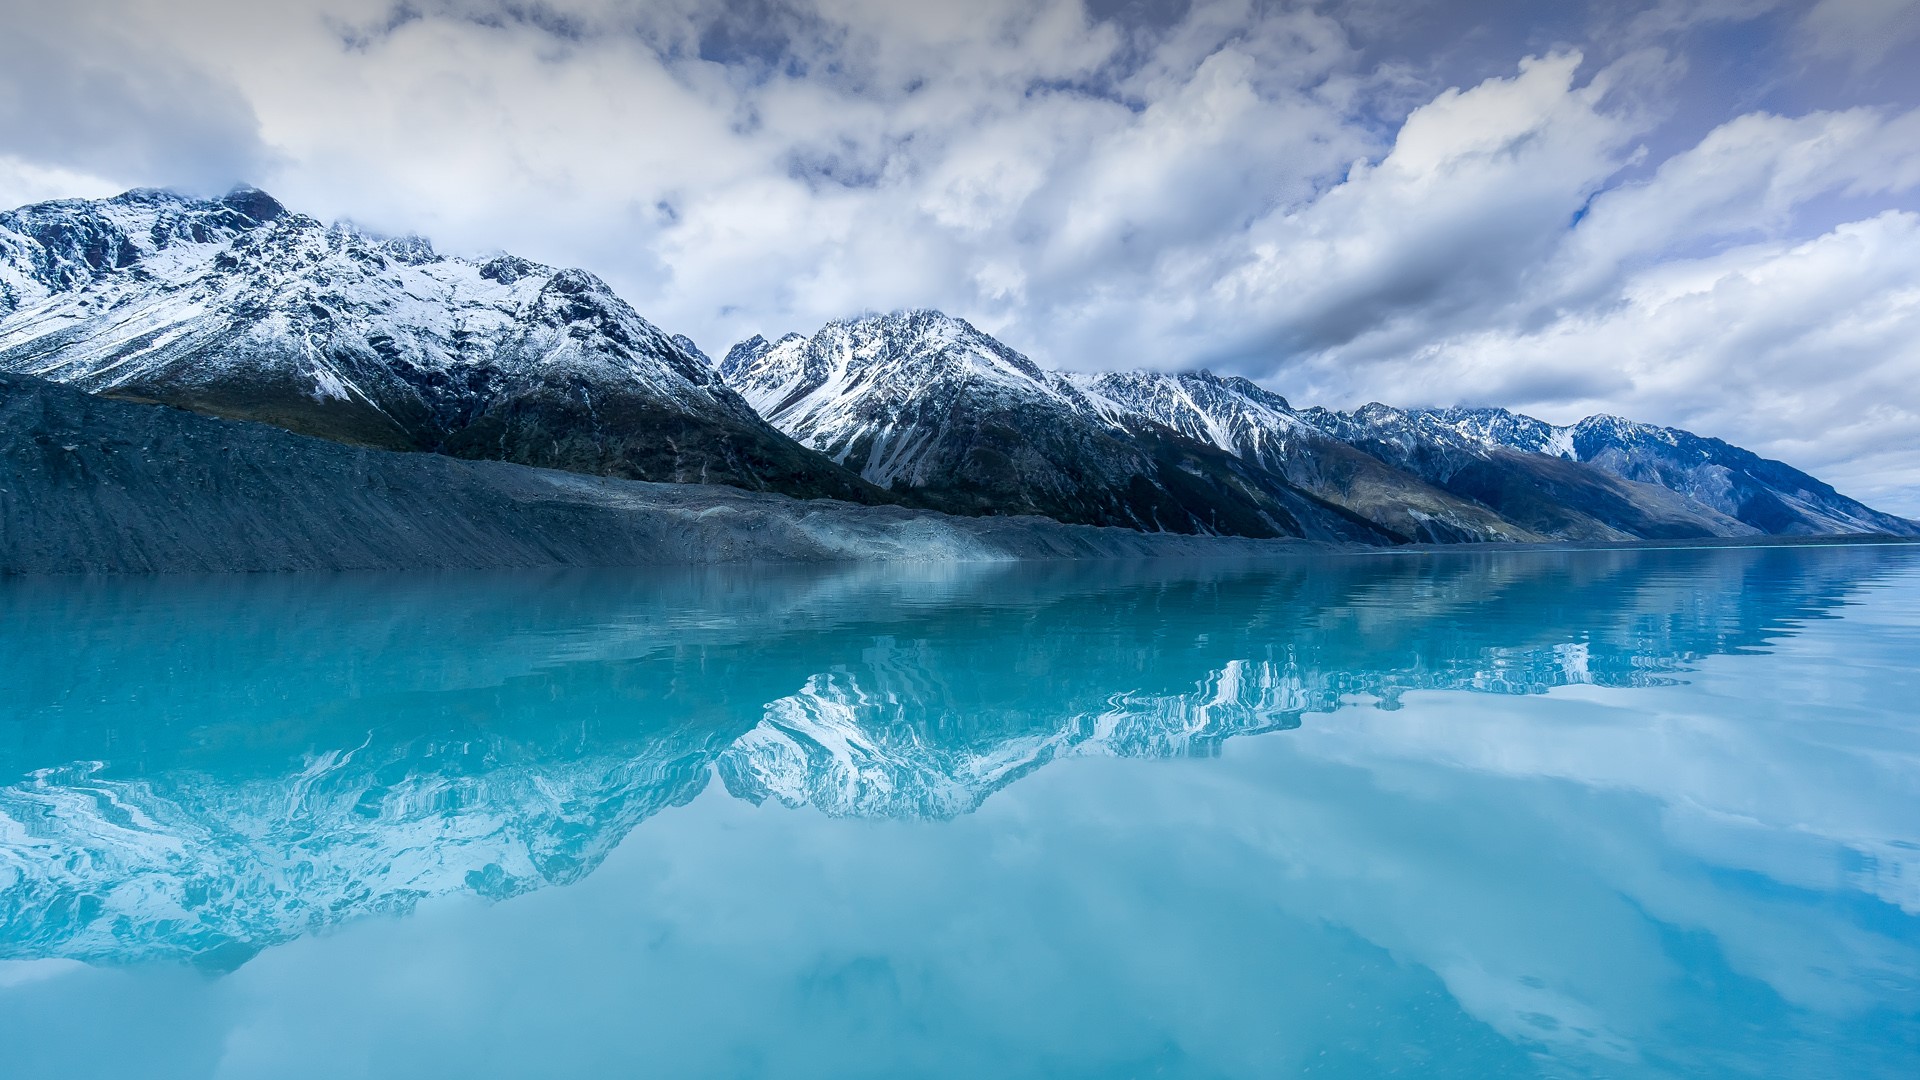 Nature Landscape Mountains Snow Clouds Sky Water Water Ripples Reflection Snowy Mountain Tasman Lake 1920x1080